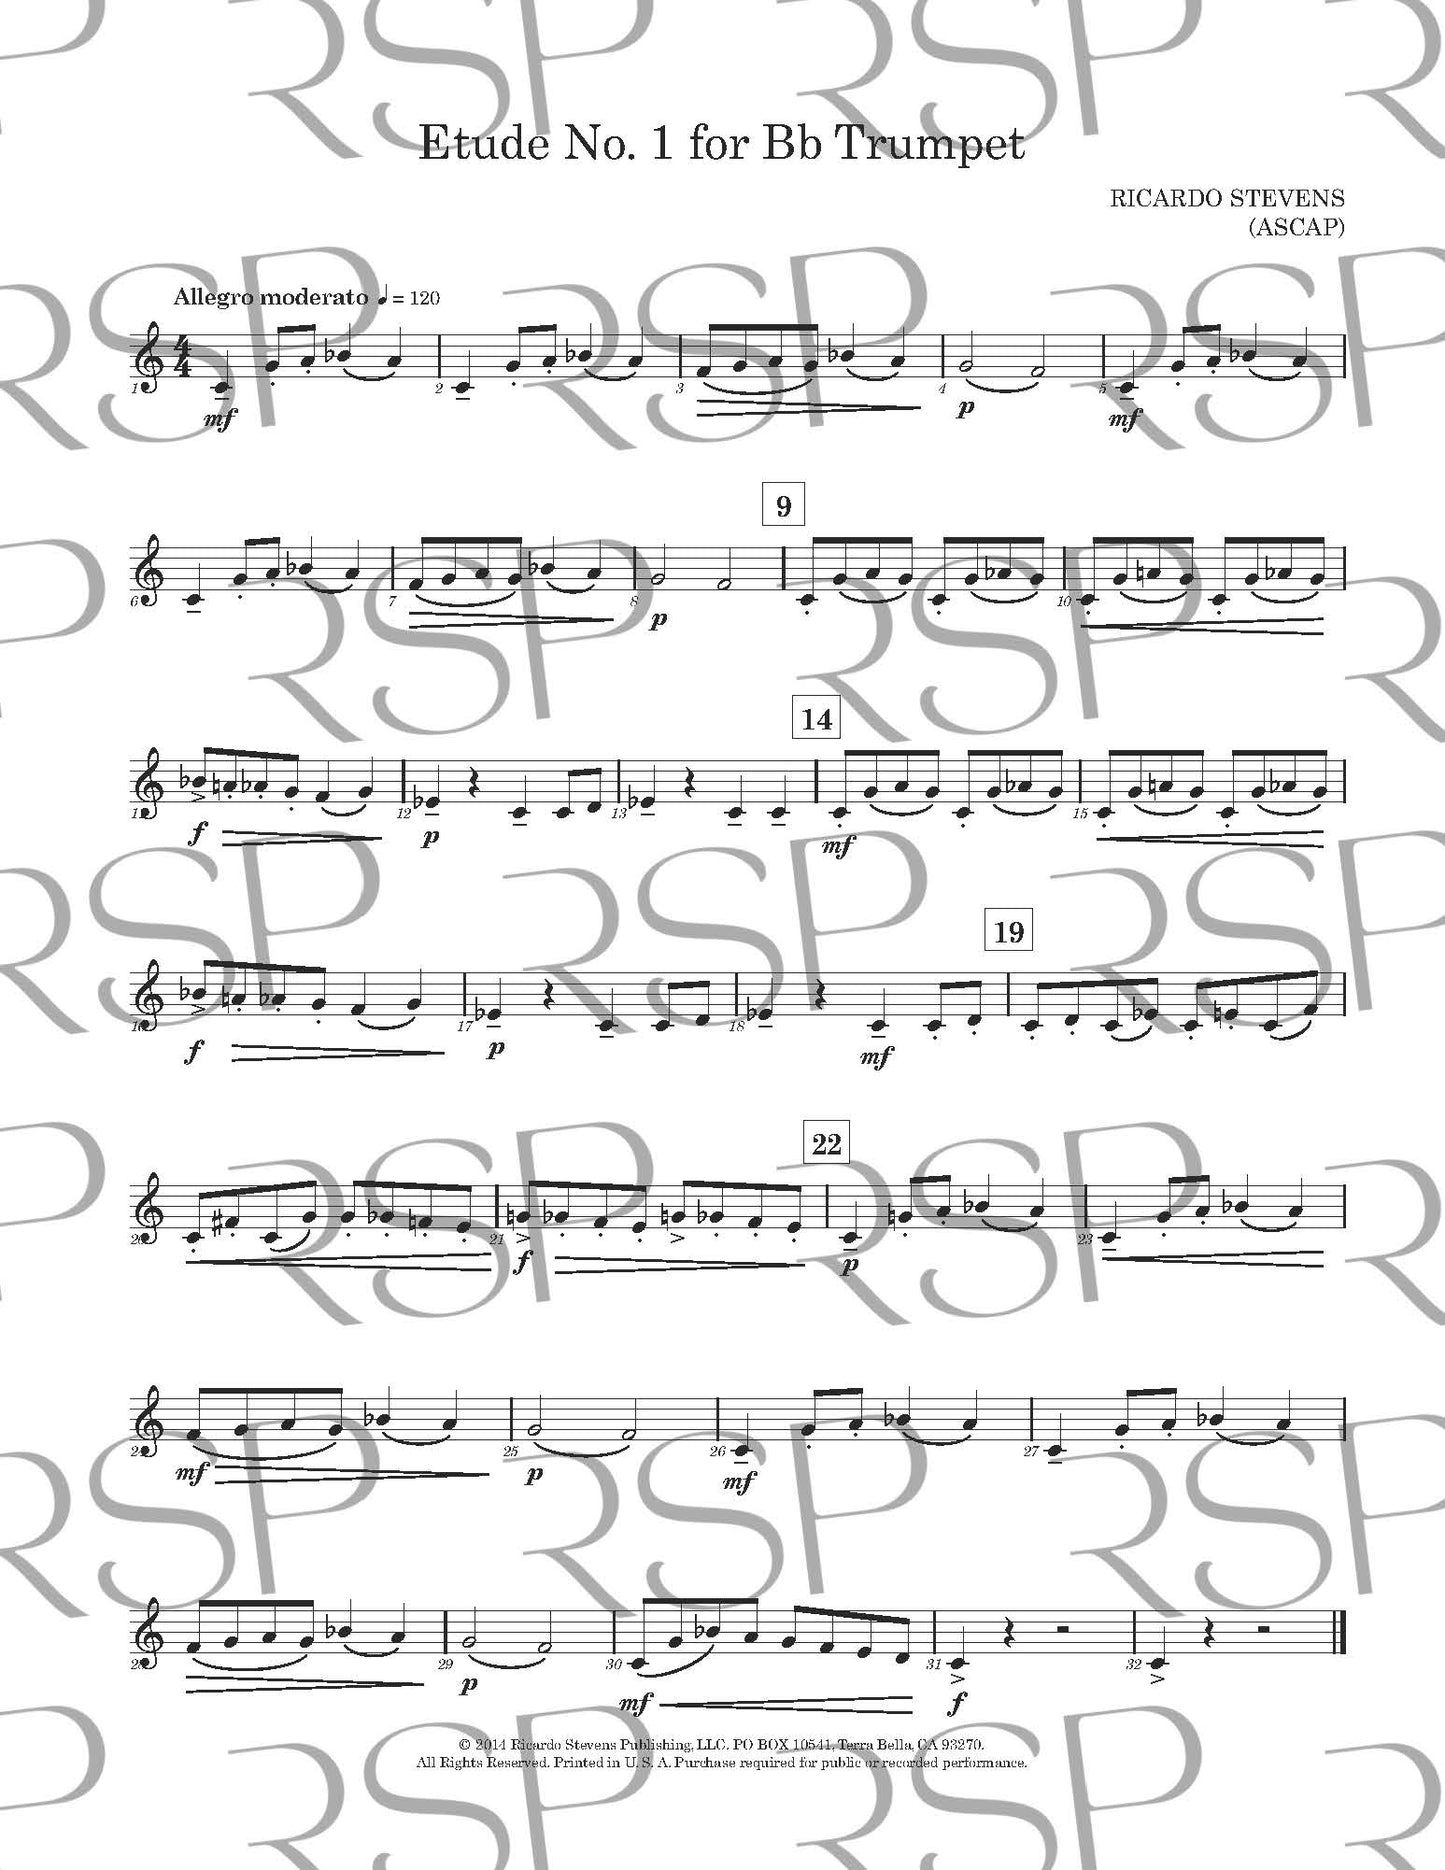 Etude No. 1 for Bb Trumpet